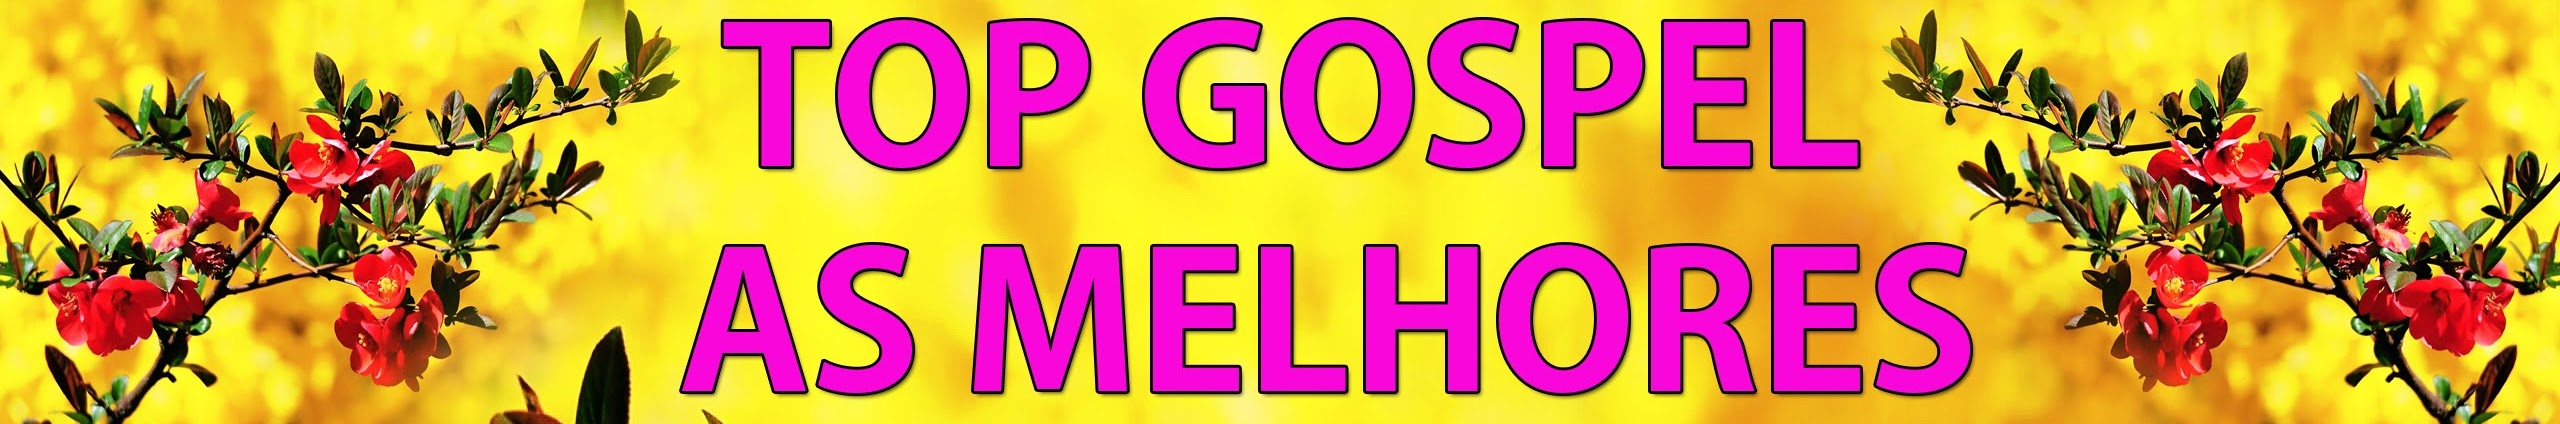 Top Gospel As melhores Músicas YouTube Channel Analytics and Report -  Powered by NoxInfluencer Mobile